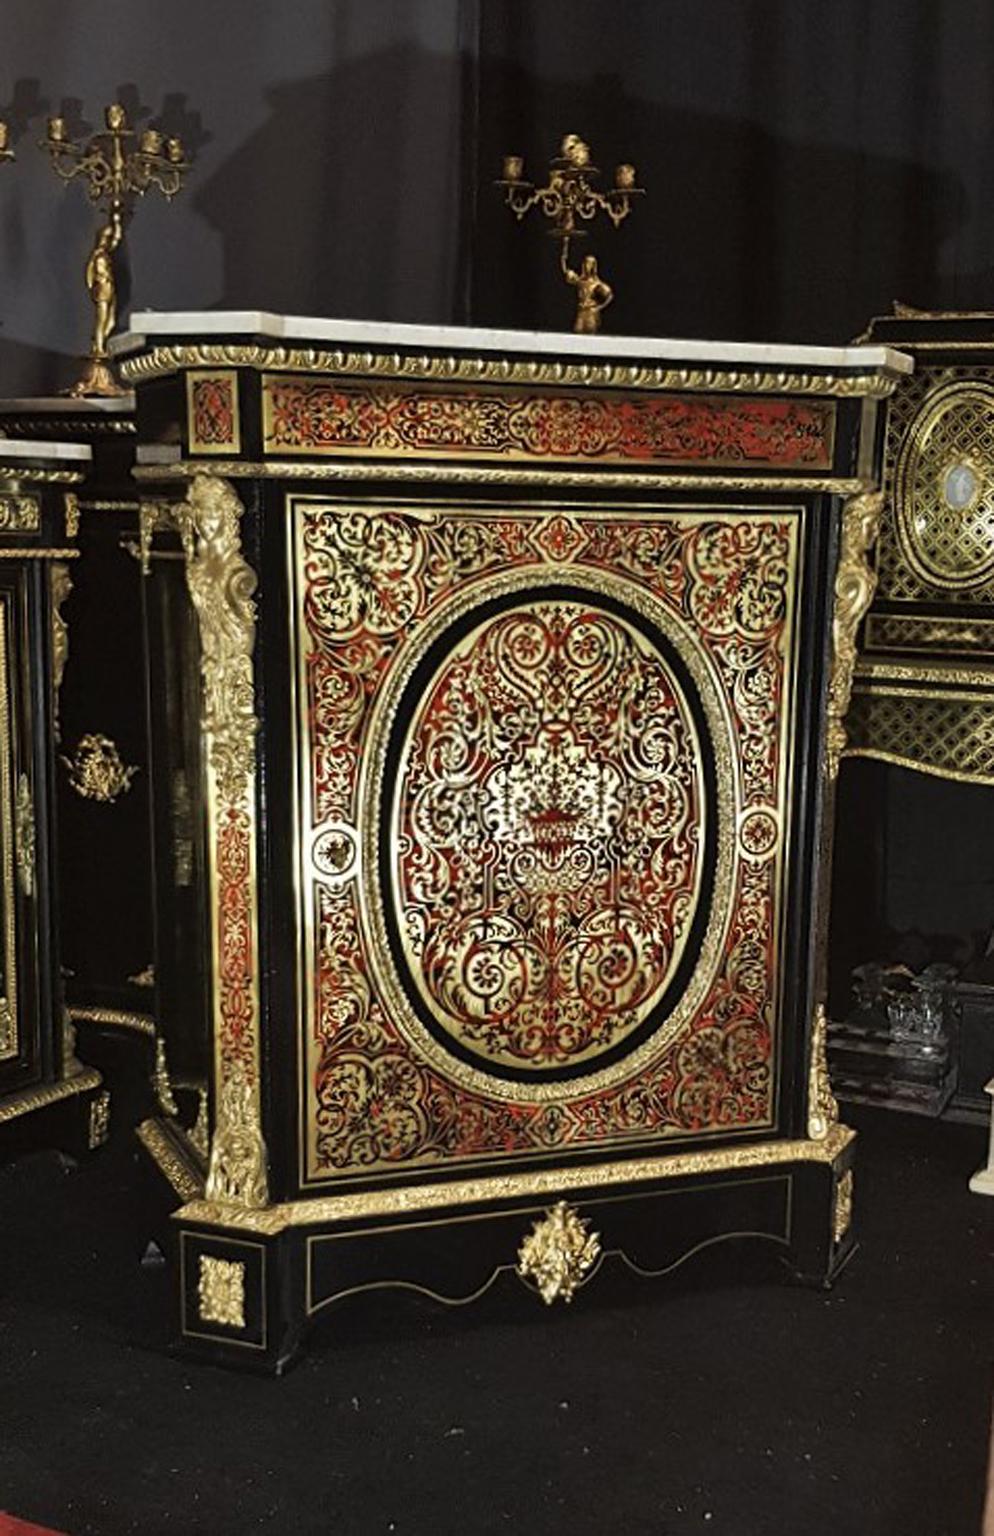 Gorgeous Boulle Marquetry Cabinet in red  Horn and Brass with rich ornementations. à riche décor d’entrelacs, volutes, rinceaux, urnes et bouquets. Gorgeous Gilt Bronze decoration details and 2 big Caryathids and a Faun mask .
White Carrara marble